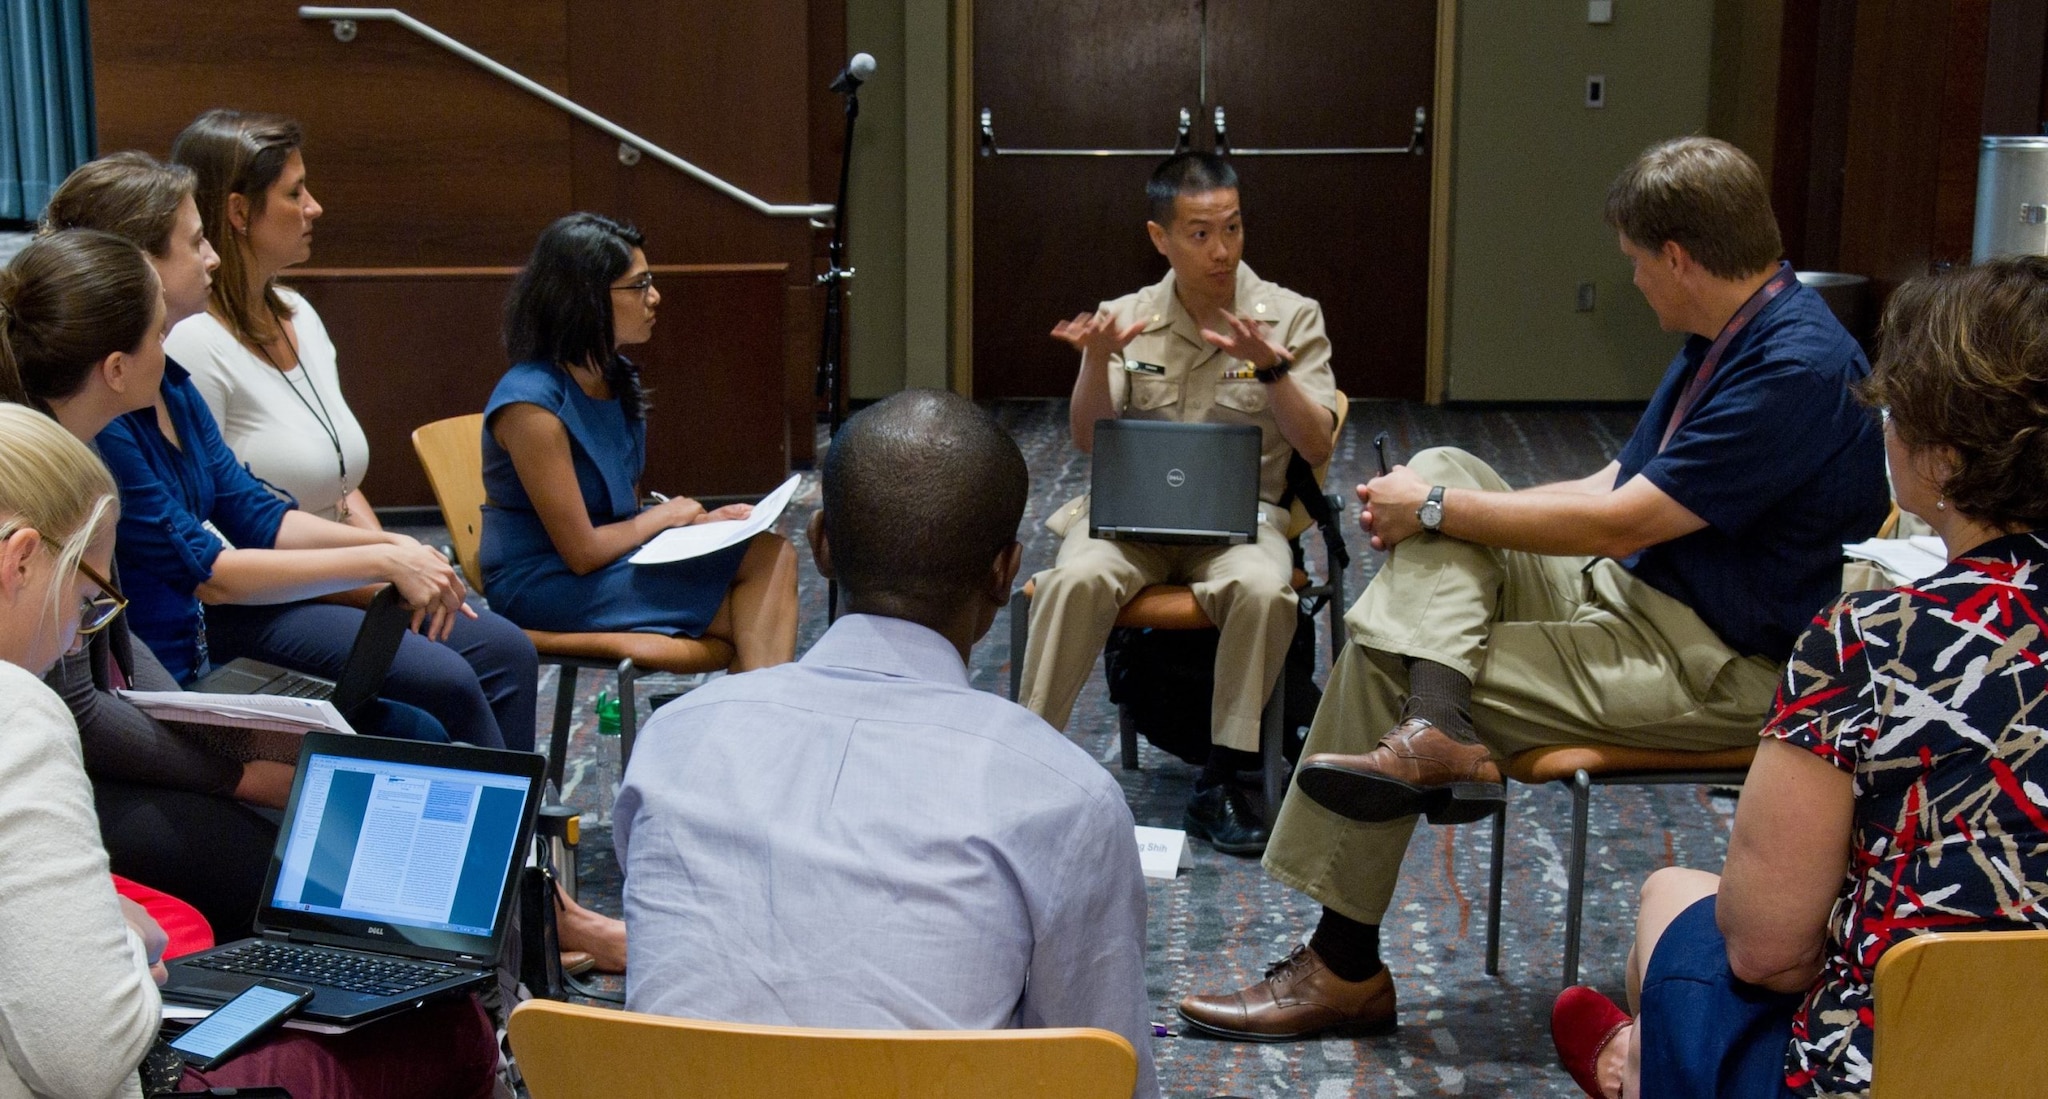 Epidemic Intelligence Service officers engage with CDC expert during media training.